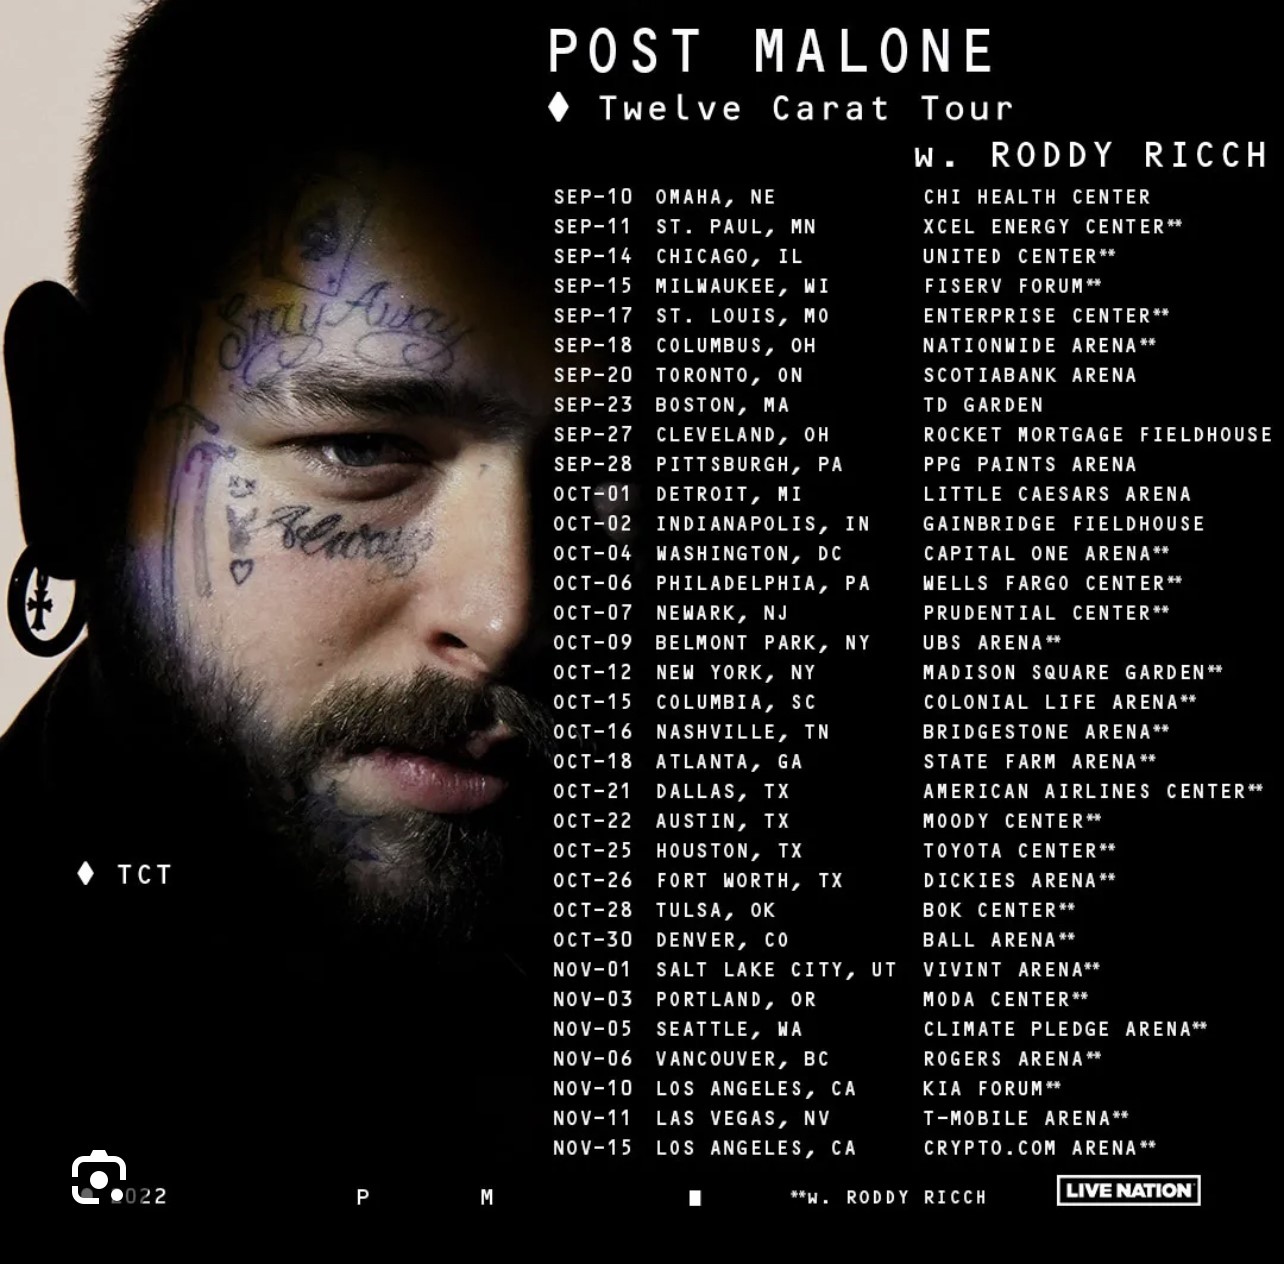 POST MALONE: TWELVE CARAT NATIONWIDE TOUR on Nov 18, 20:00@VARIOUS LOCATONS - Buy tickets and Get information on MY TICKETS™ tickets.bhglabel.com